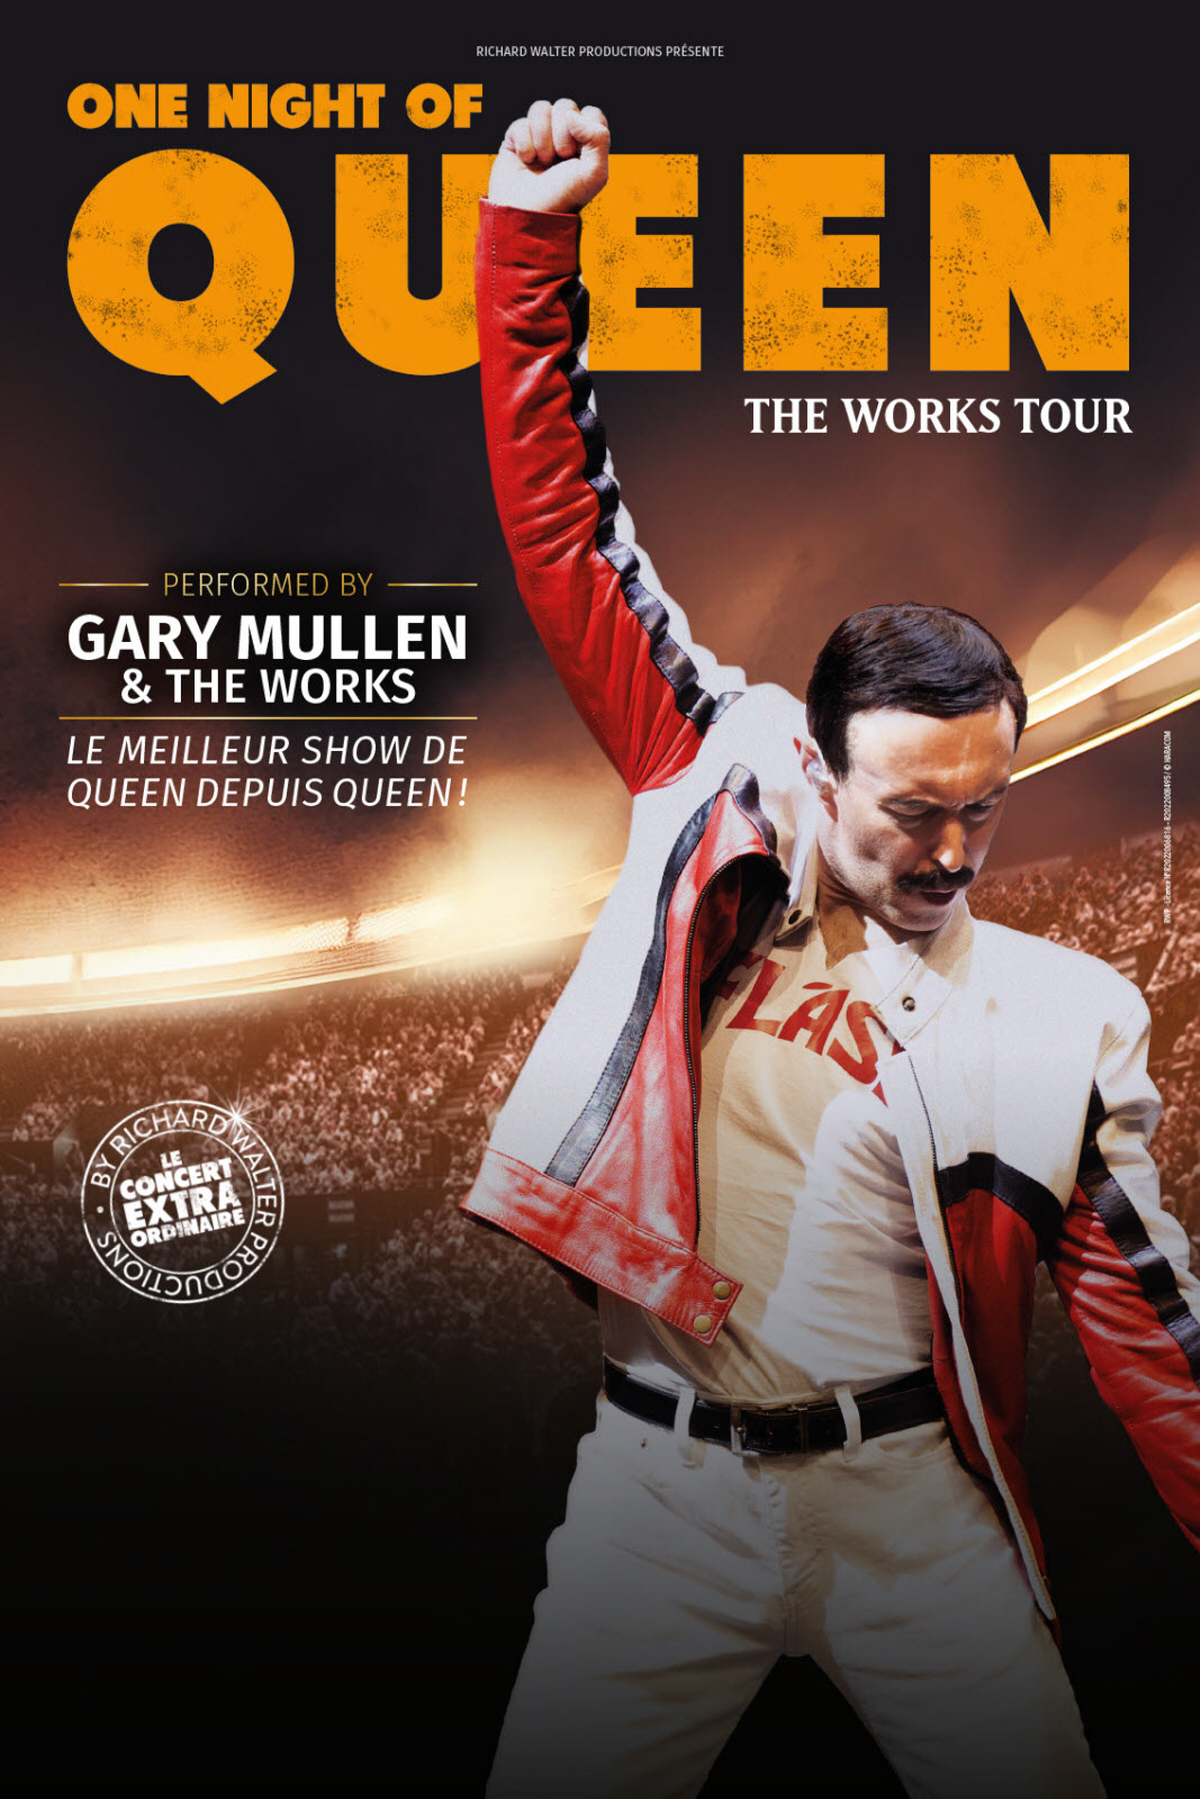 One Night Of Queen - The Works Tour at M.a.ch 36 Tickets